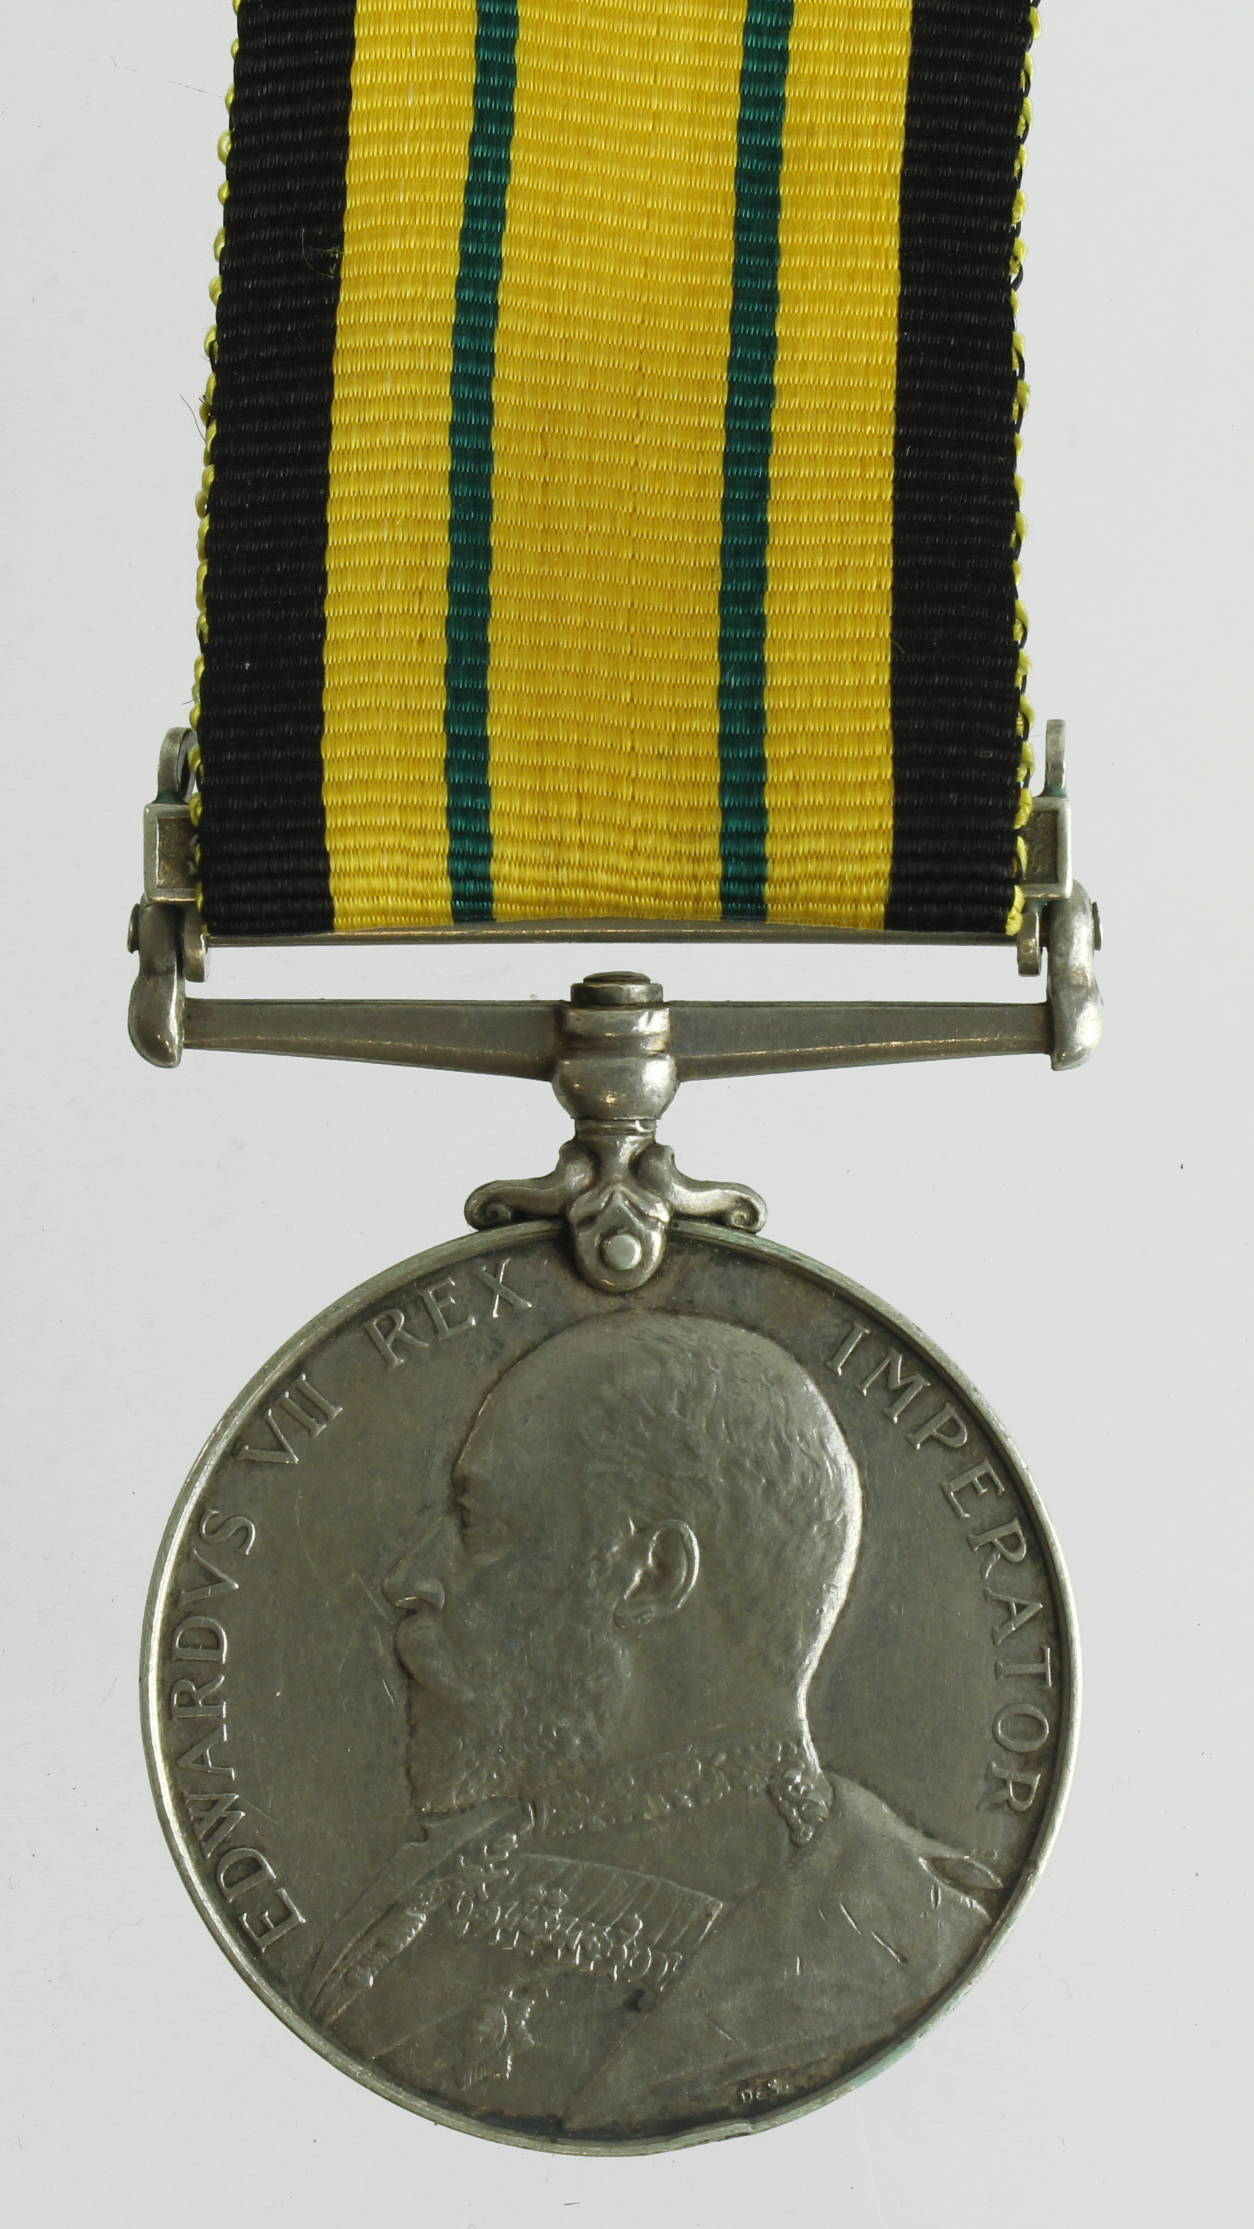 Africa General Service Medal EDVII with Somaliland 1902-04 clasp (3052 Pte Ram Sarup Ram 107th